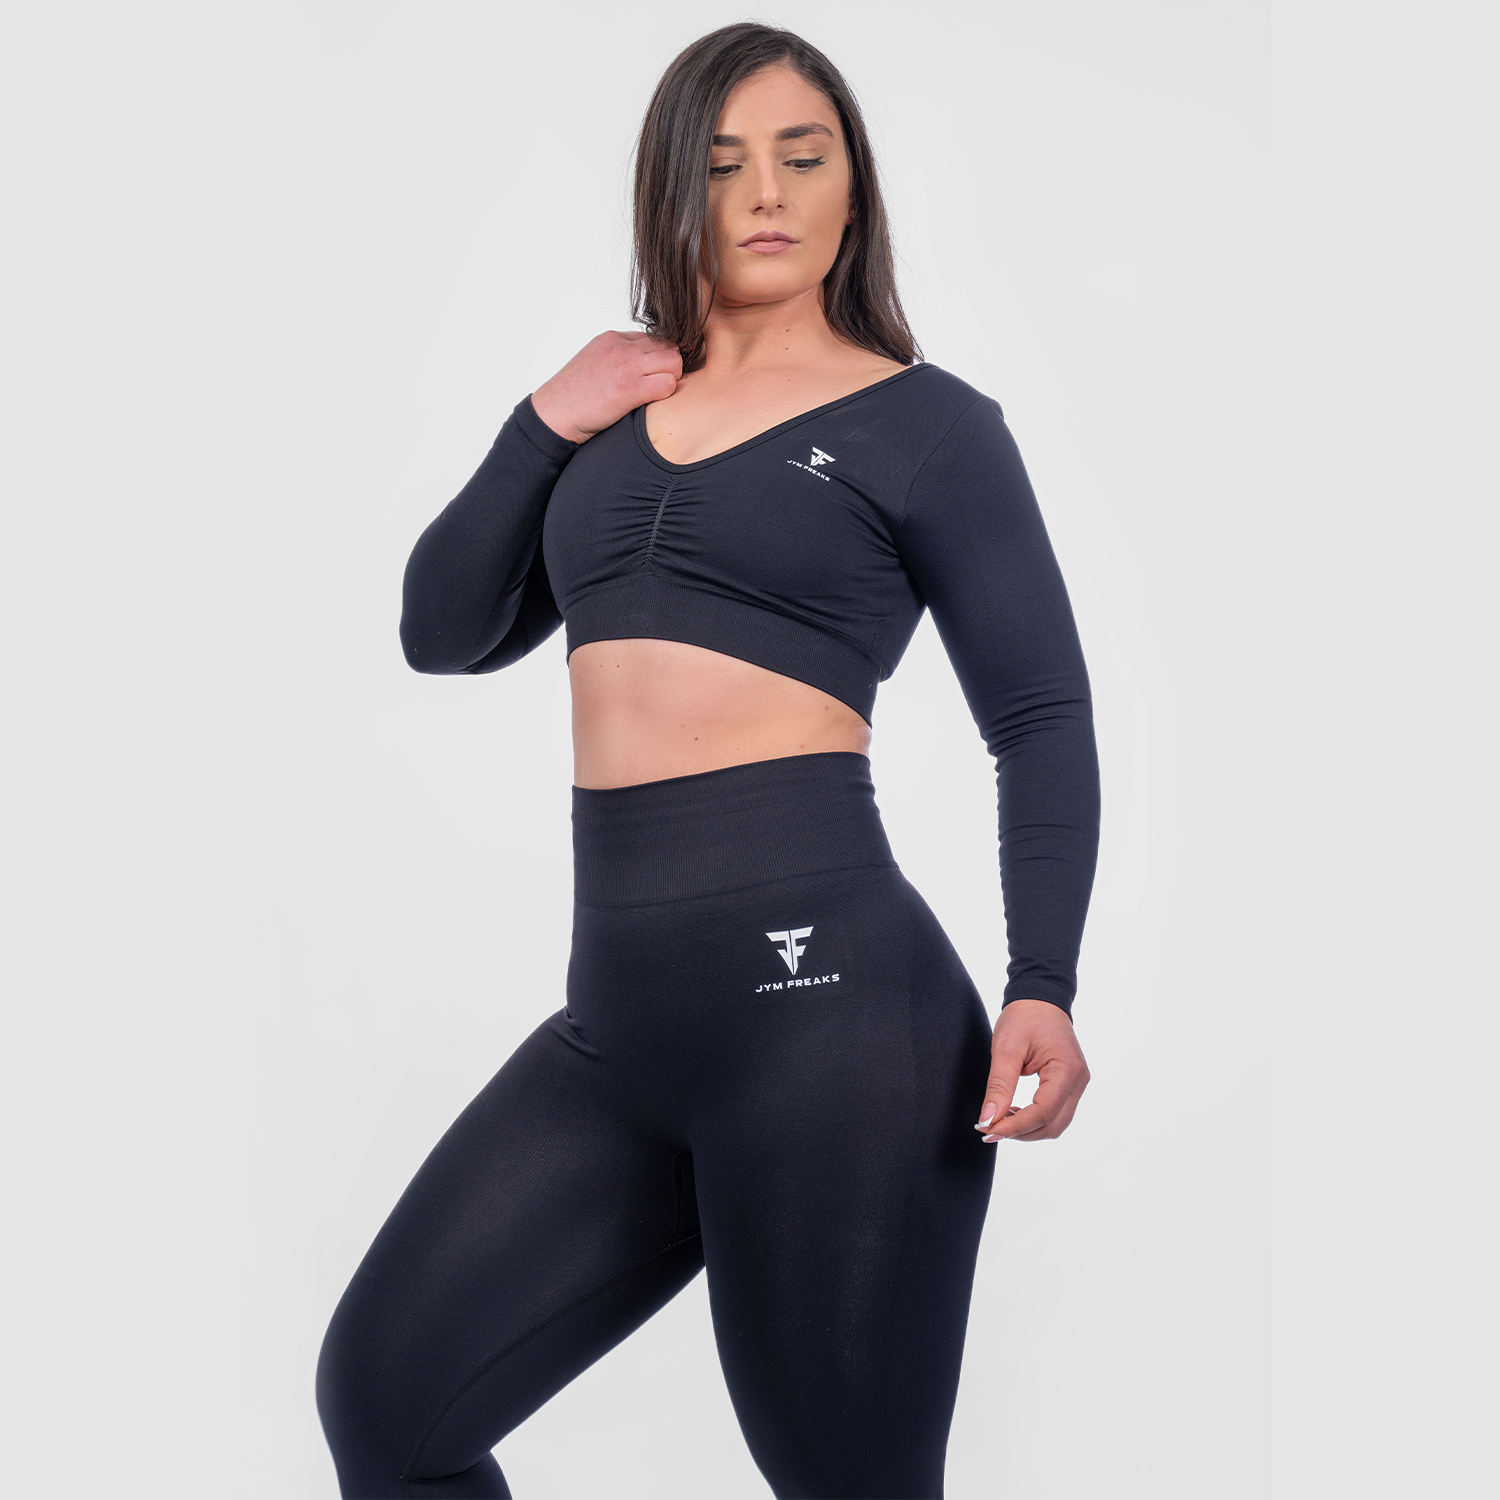 Buy F.Fashiol.com Thermal Set for Women/Ladies/Girls Winter Thermal top  Sleeveless Spaghetti and Bottom/Legging/Thermal Set Combo Size (S to 2XL)  White and Grey (Medium, White Top Bottom) Online In India At Discounted  Prices